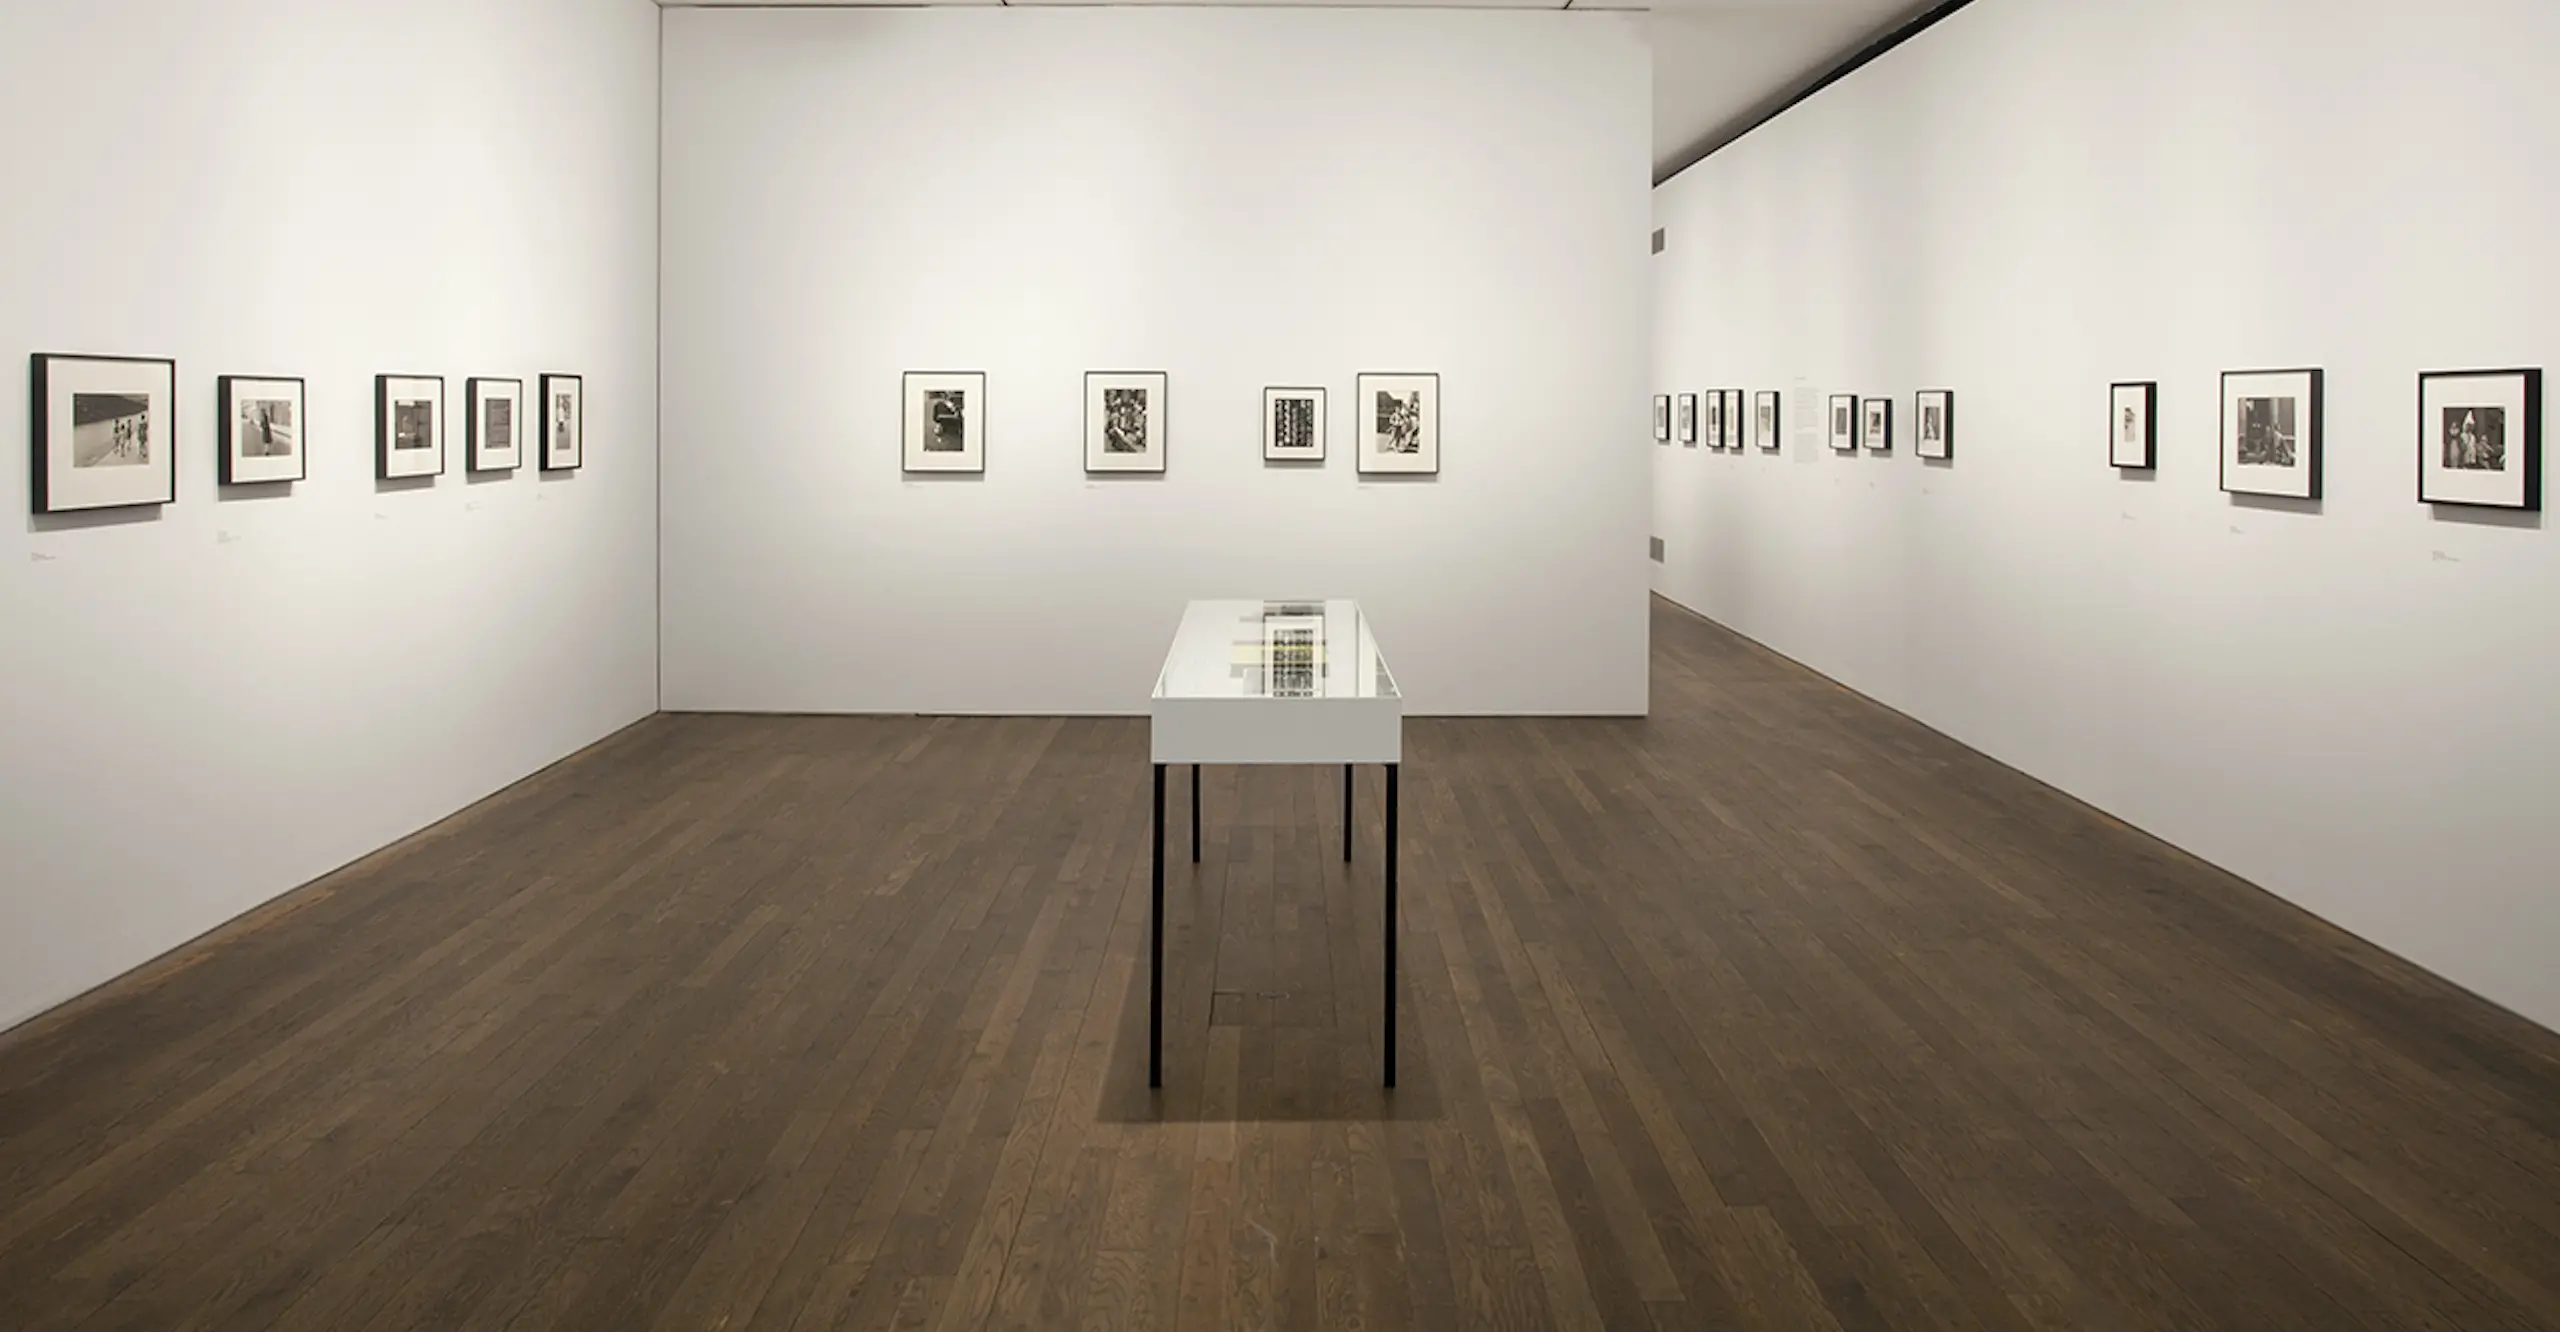 A white gallery space with small black and white prints on white walls and a vitrine in the centre.